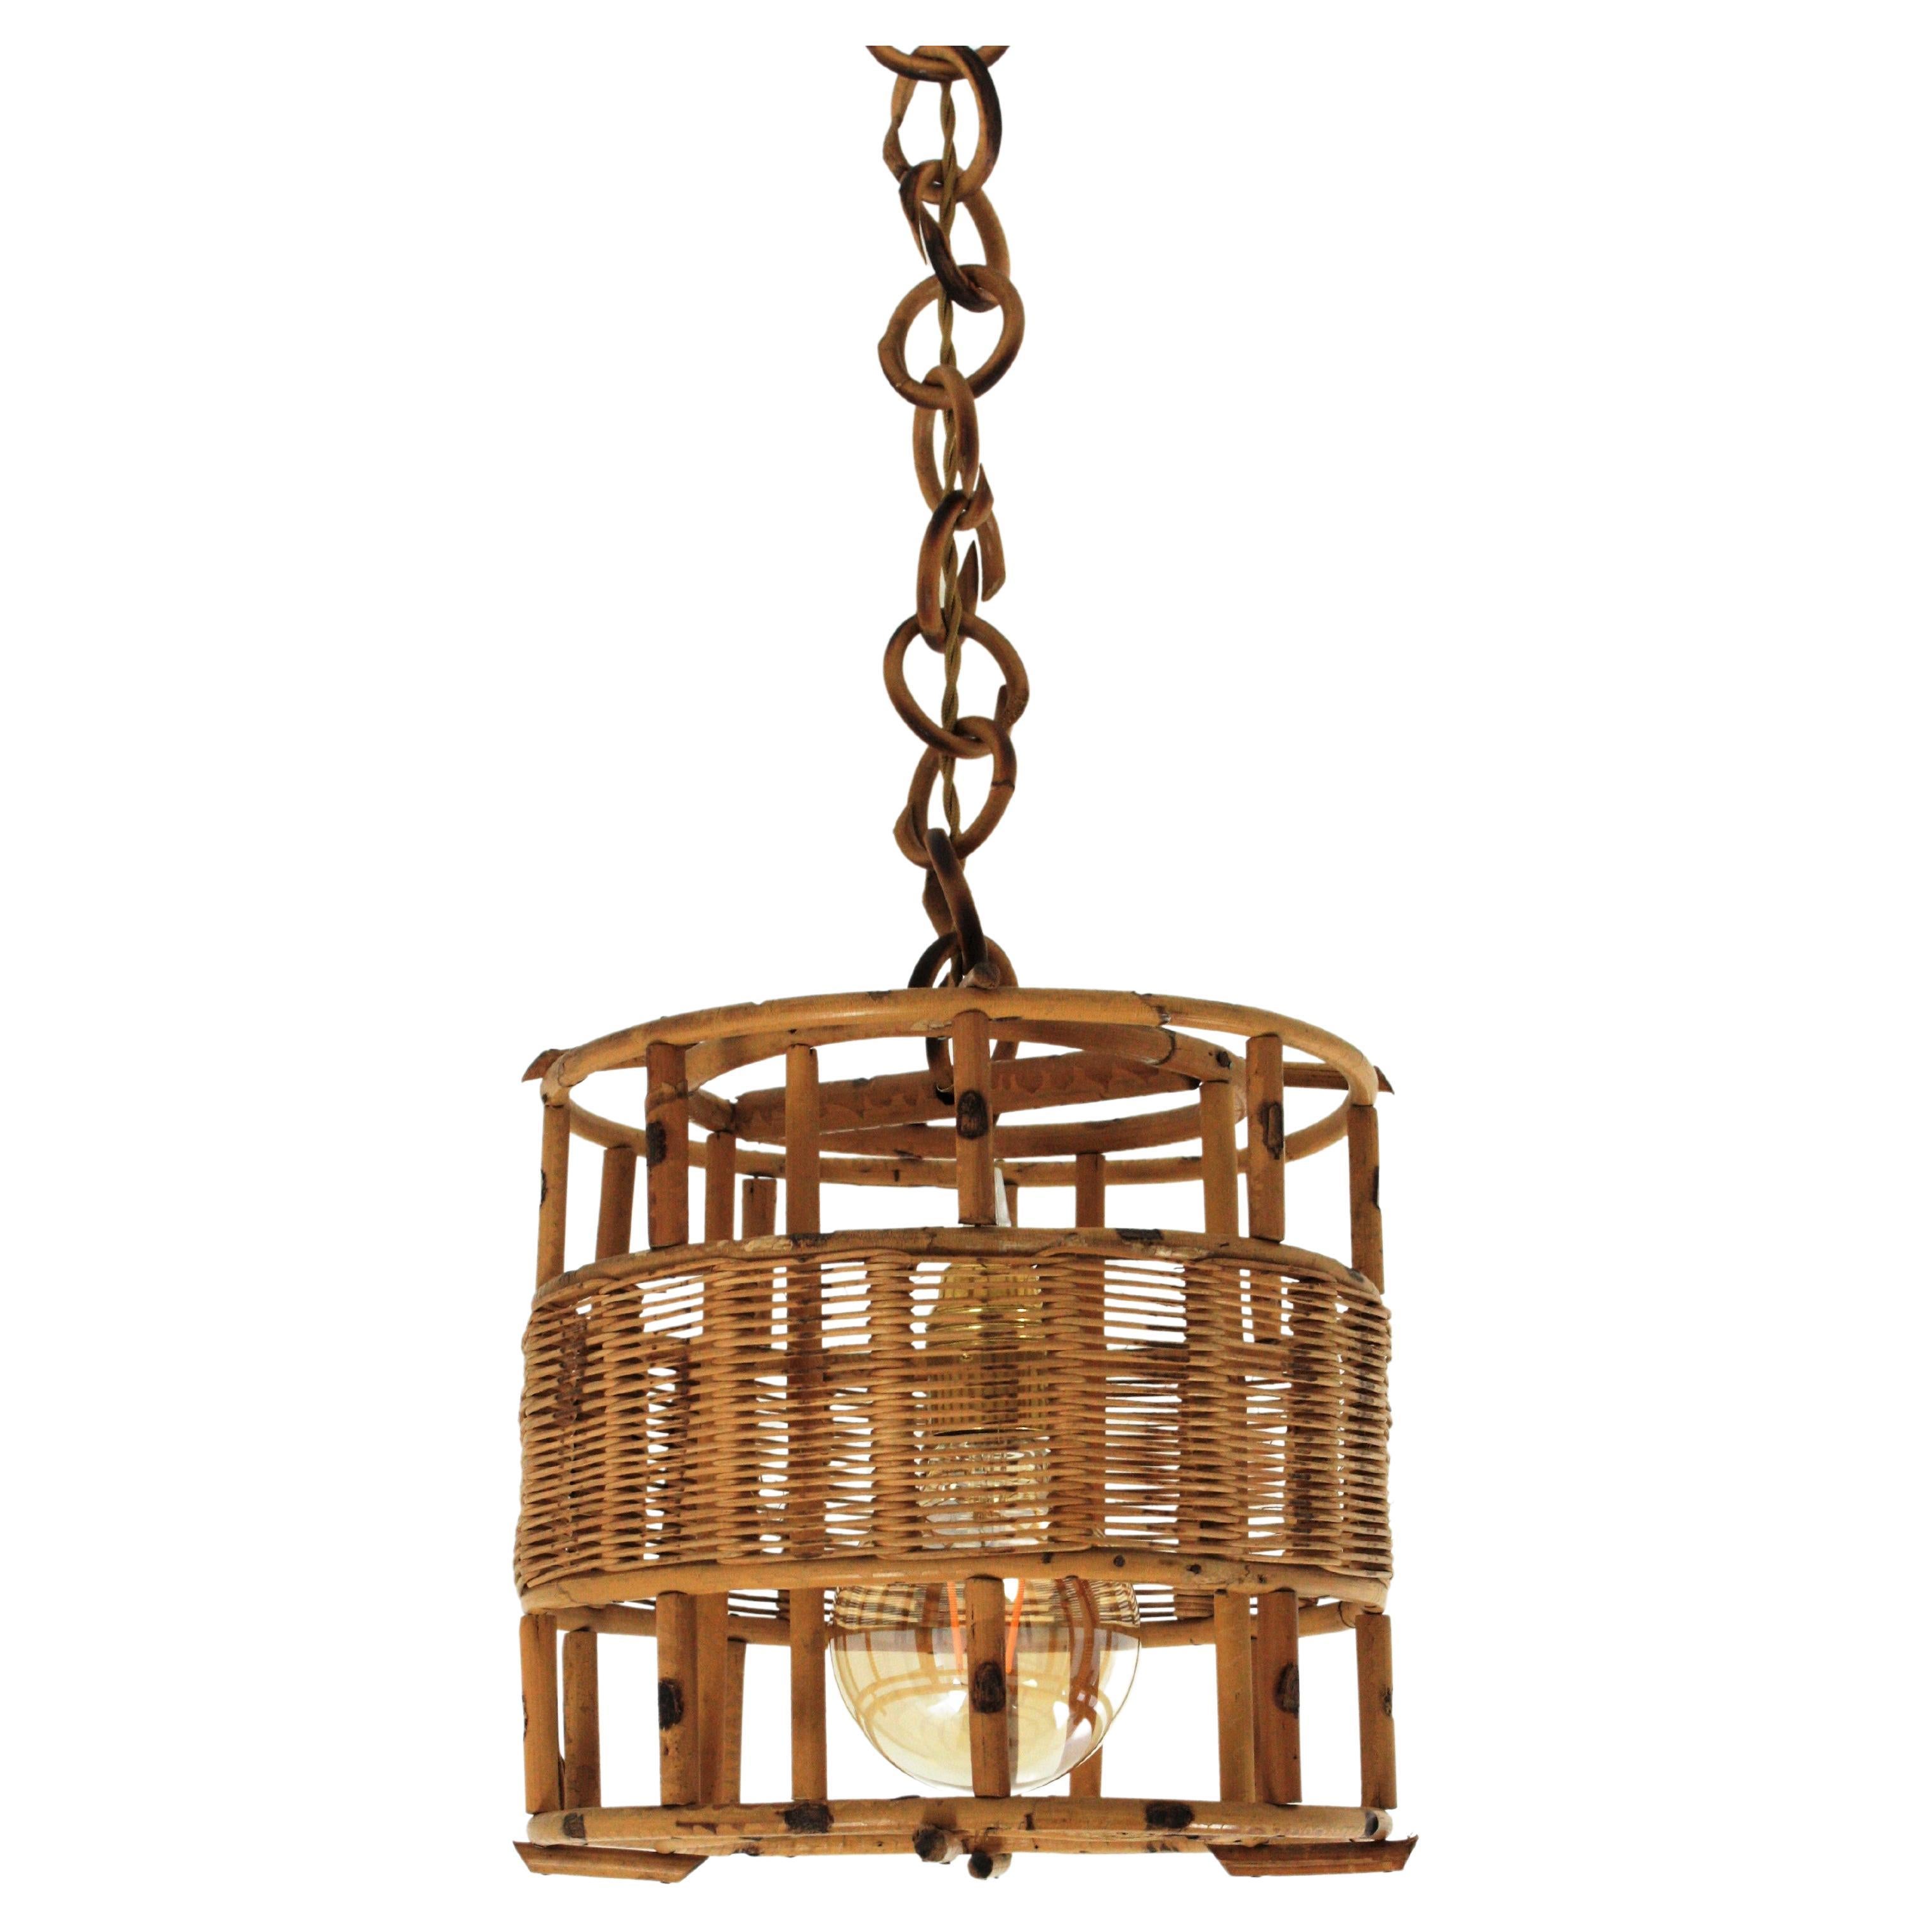 French Modernist Rattan Pendant Lamp or Lantern. France, 1950s-1960s
A cool handcrafted rattan drum shaped ceiling suspension lamp with wicker details to difusse the lightt.
This eye-catching rattan chandelier features a cylinder shape rattan